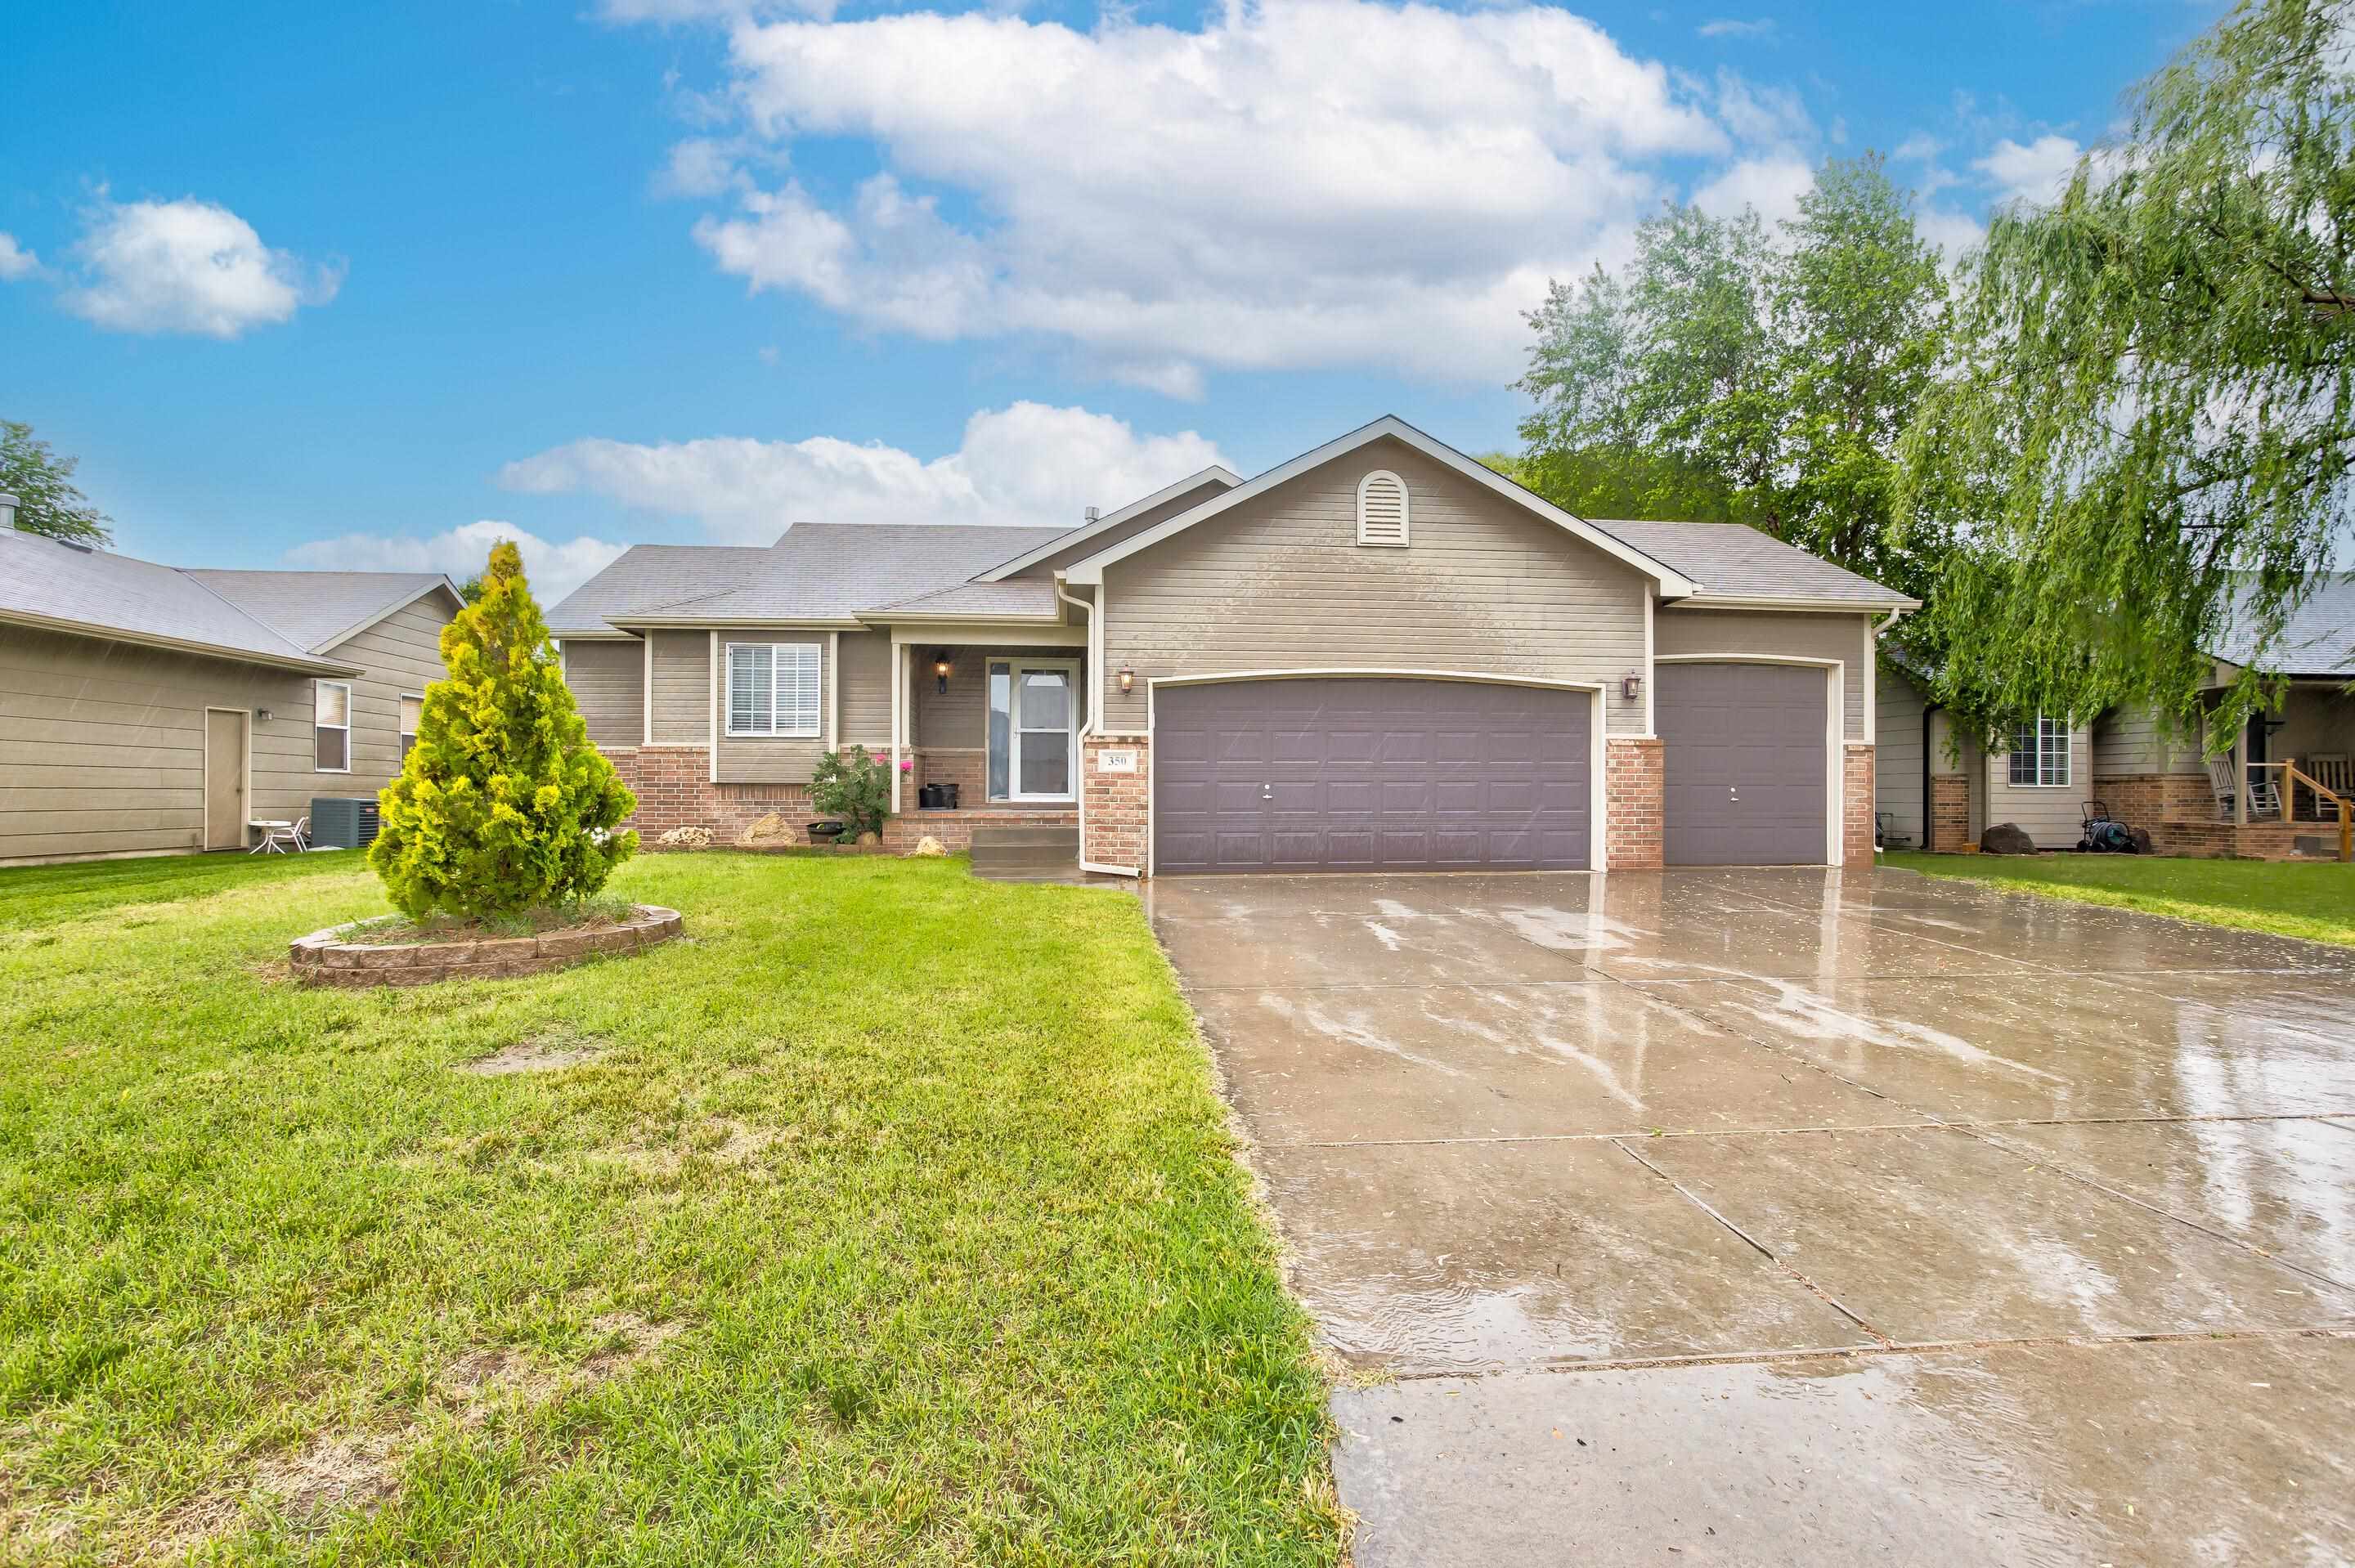 Welcome Home! This is a wonderful 4 bedroom, 3 full bathroom, 3 car garage with a fully fenced back 